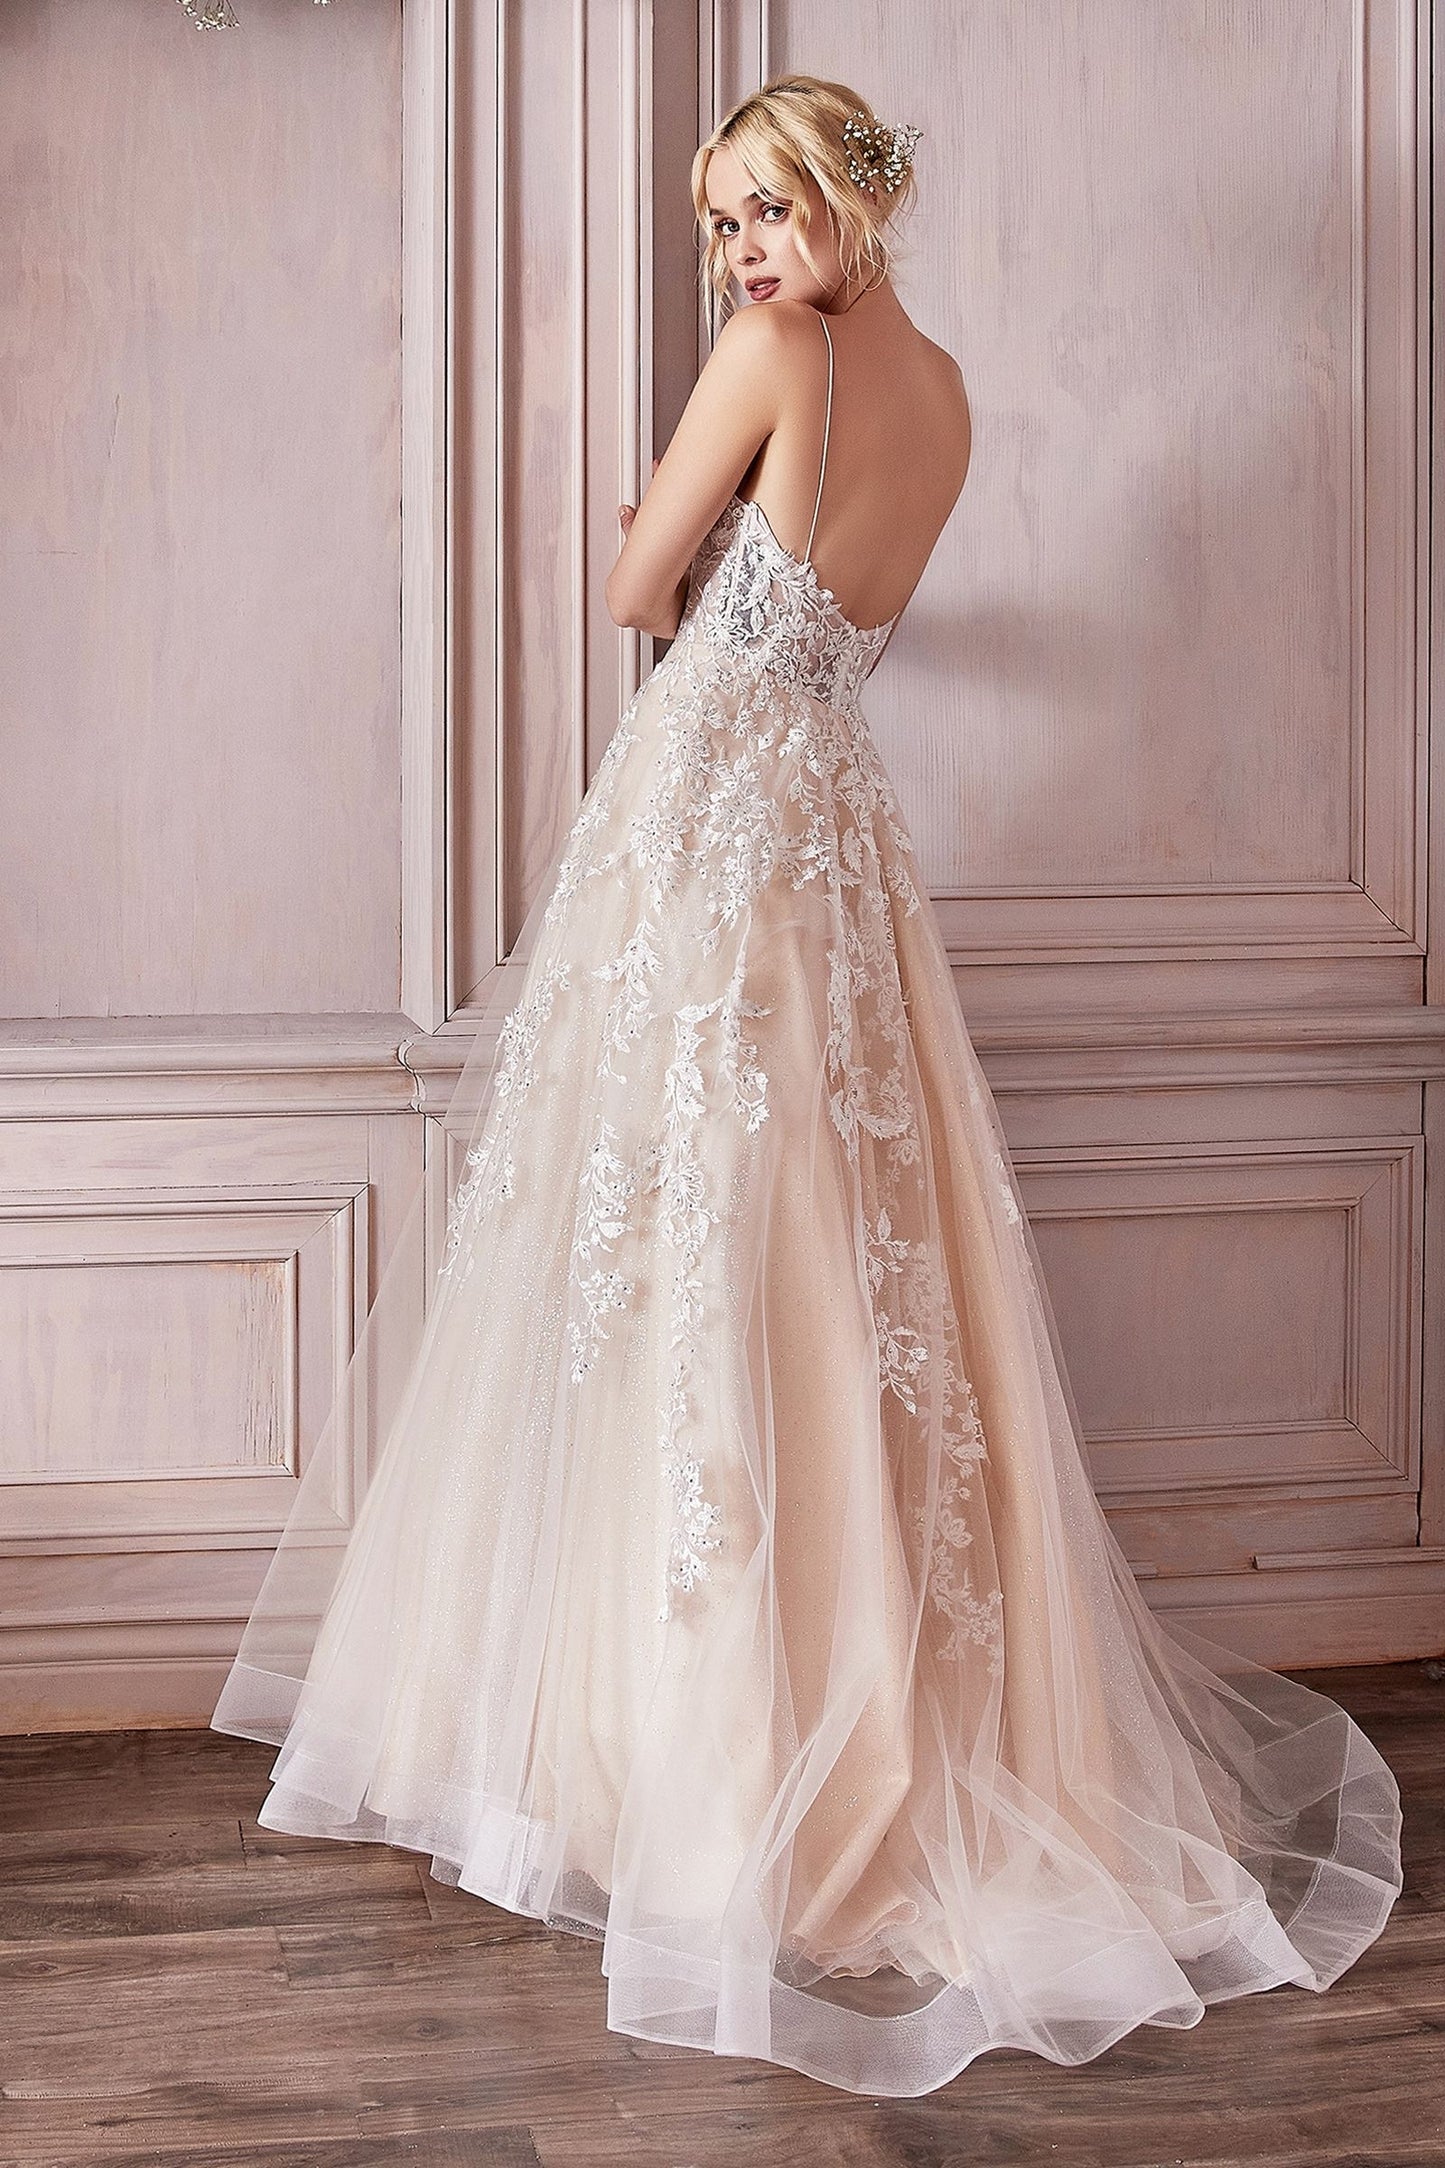 dramatic off white lace appliqued tulle overlaying champagne lining creates a stunning effects